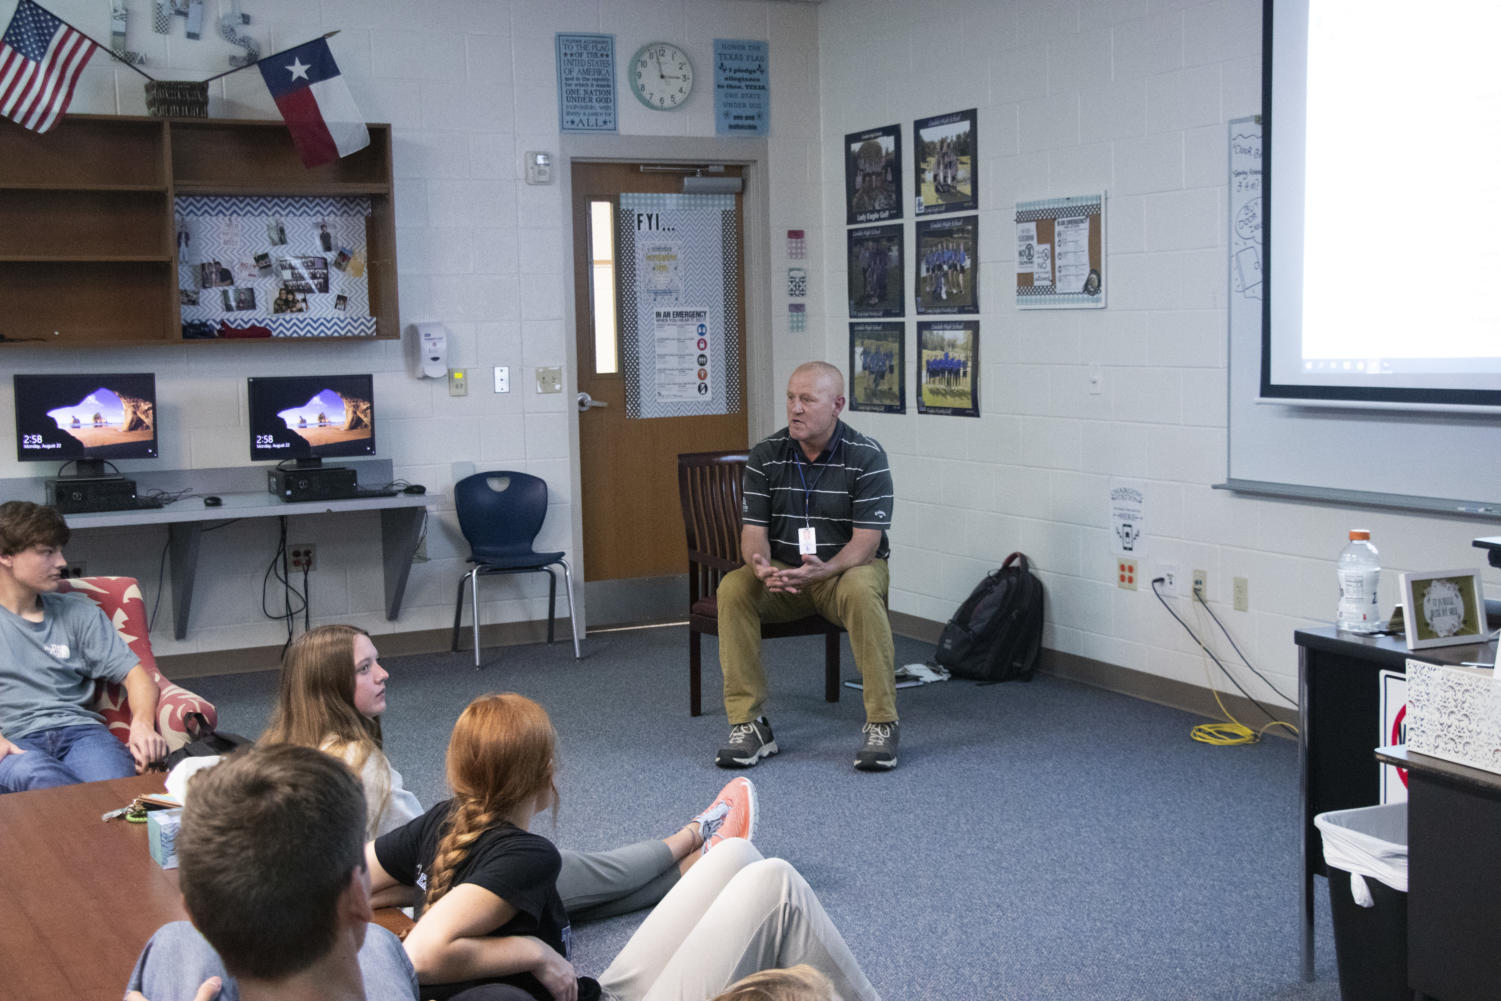 Coach Temple teaches his students new golf techniques in a discussion session at the start of school.